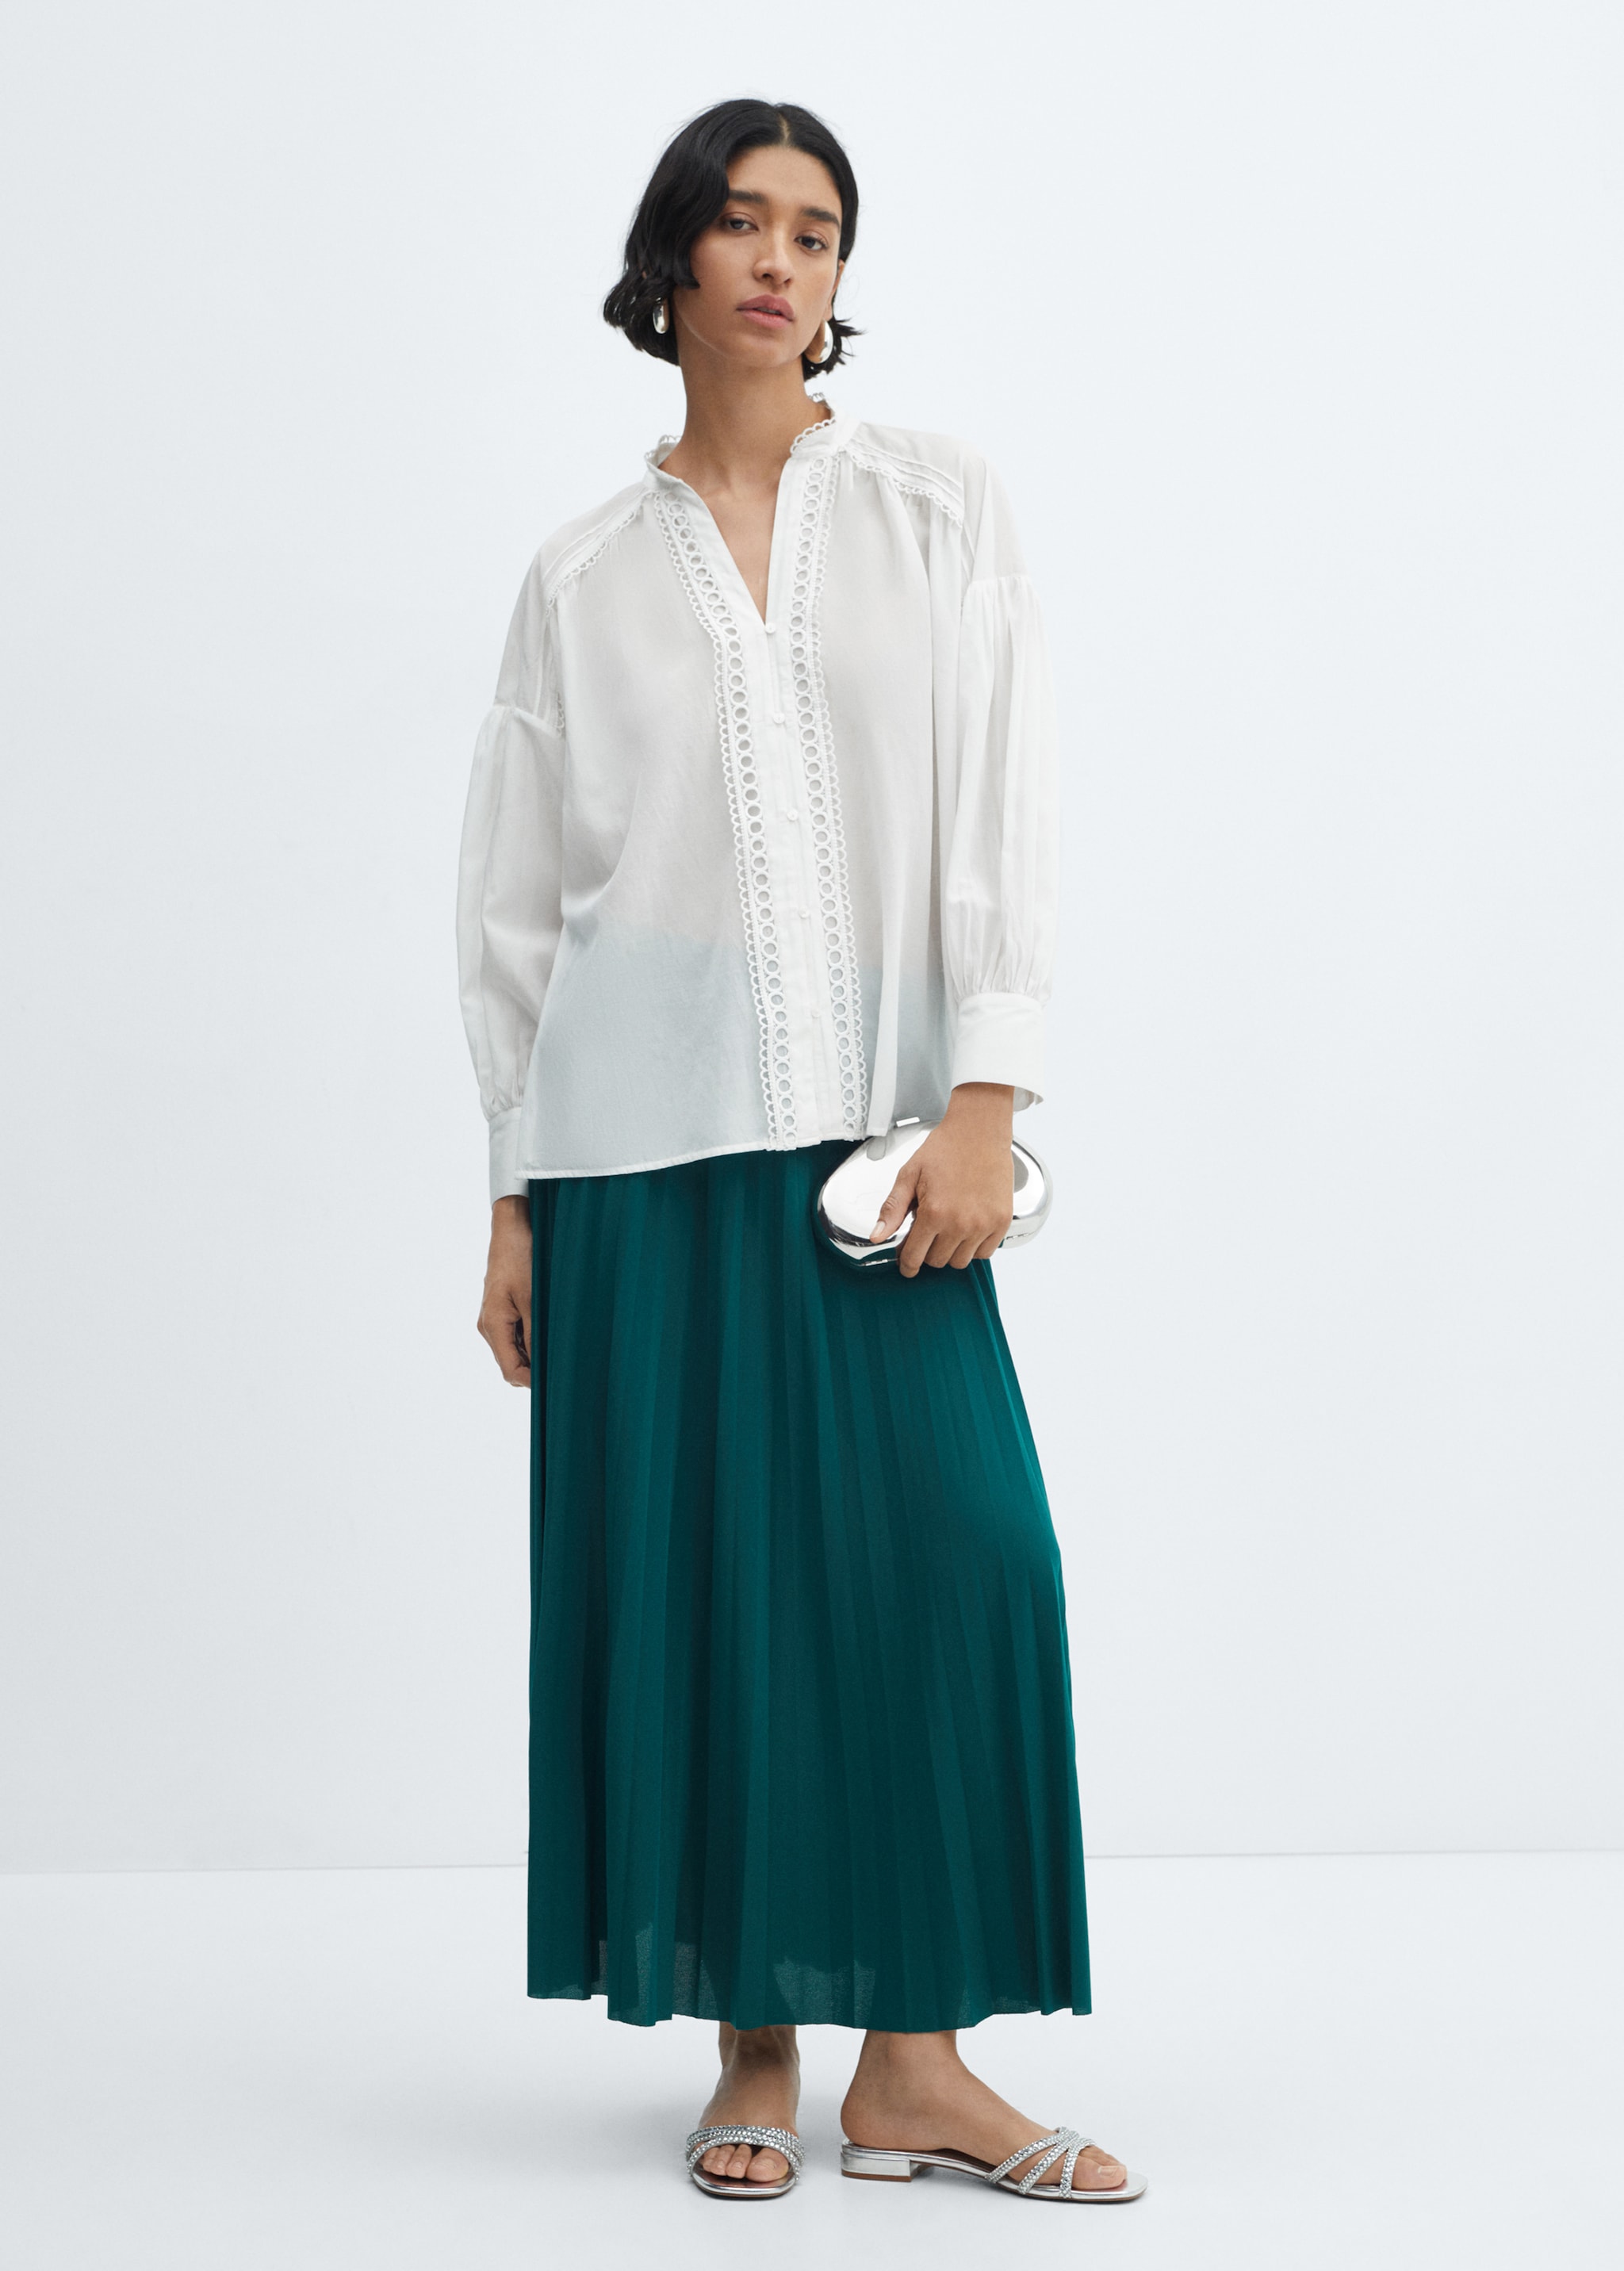 Cotton blouse with openwork detail  - General plane